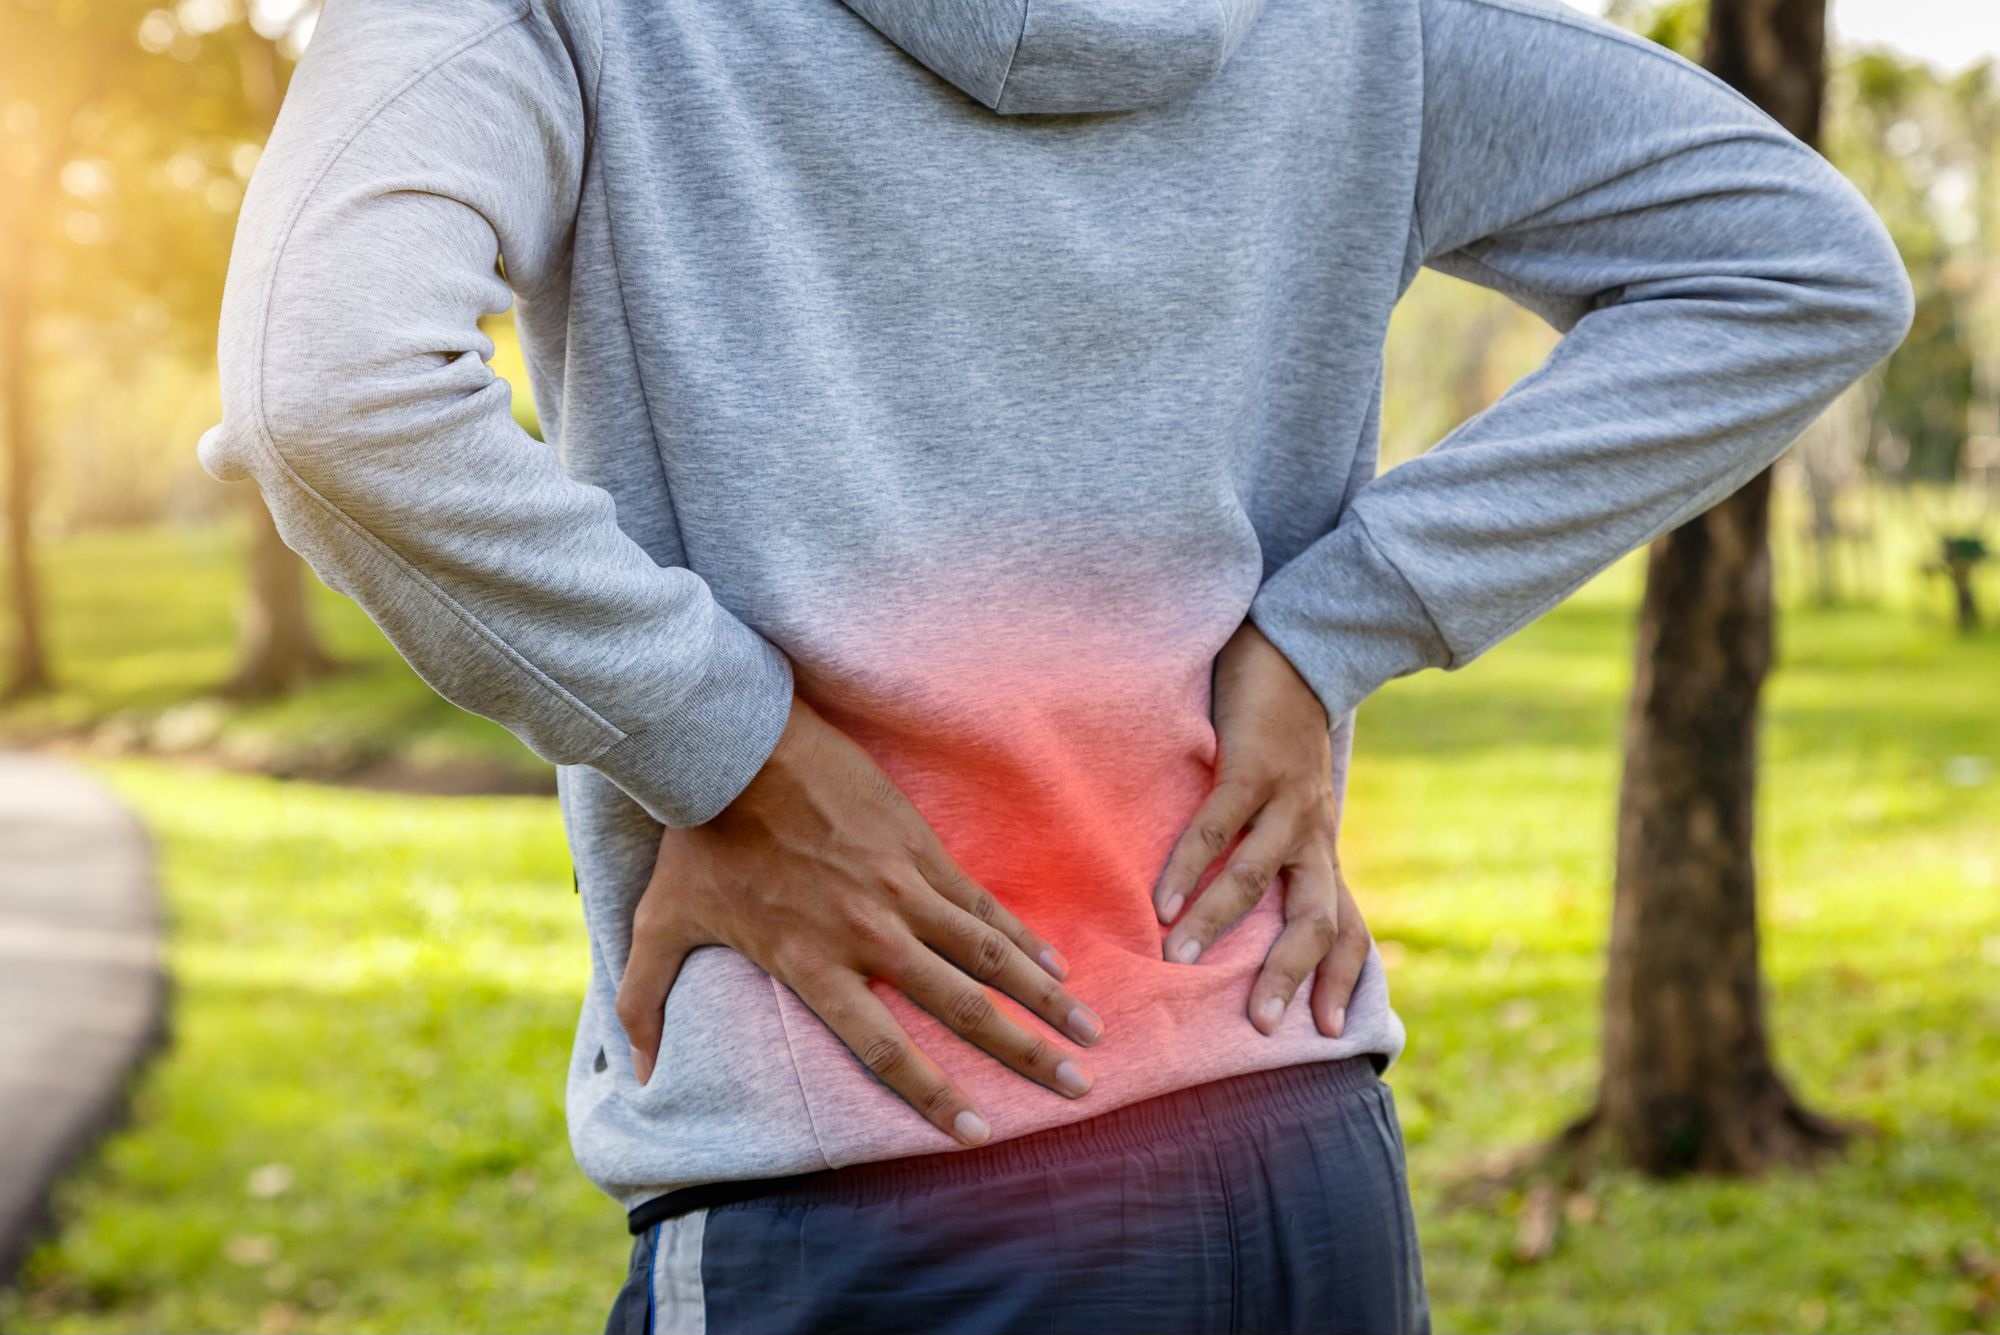 A man suffering from back pain when running.